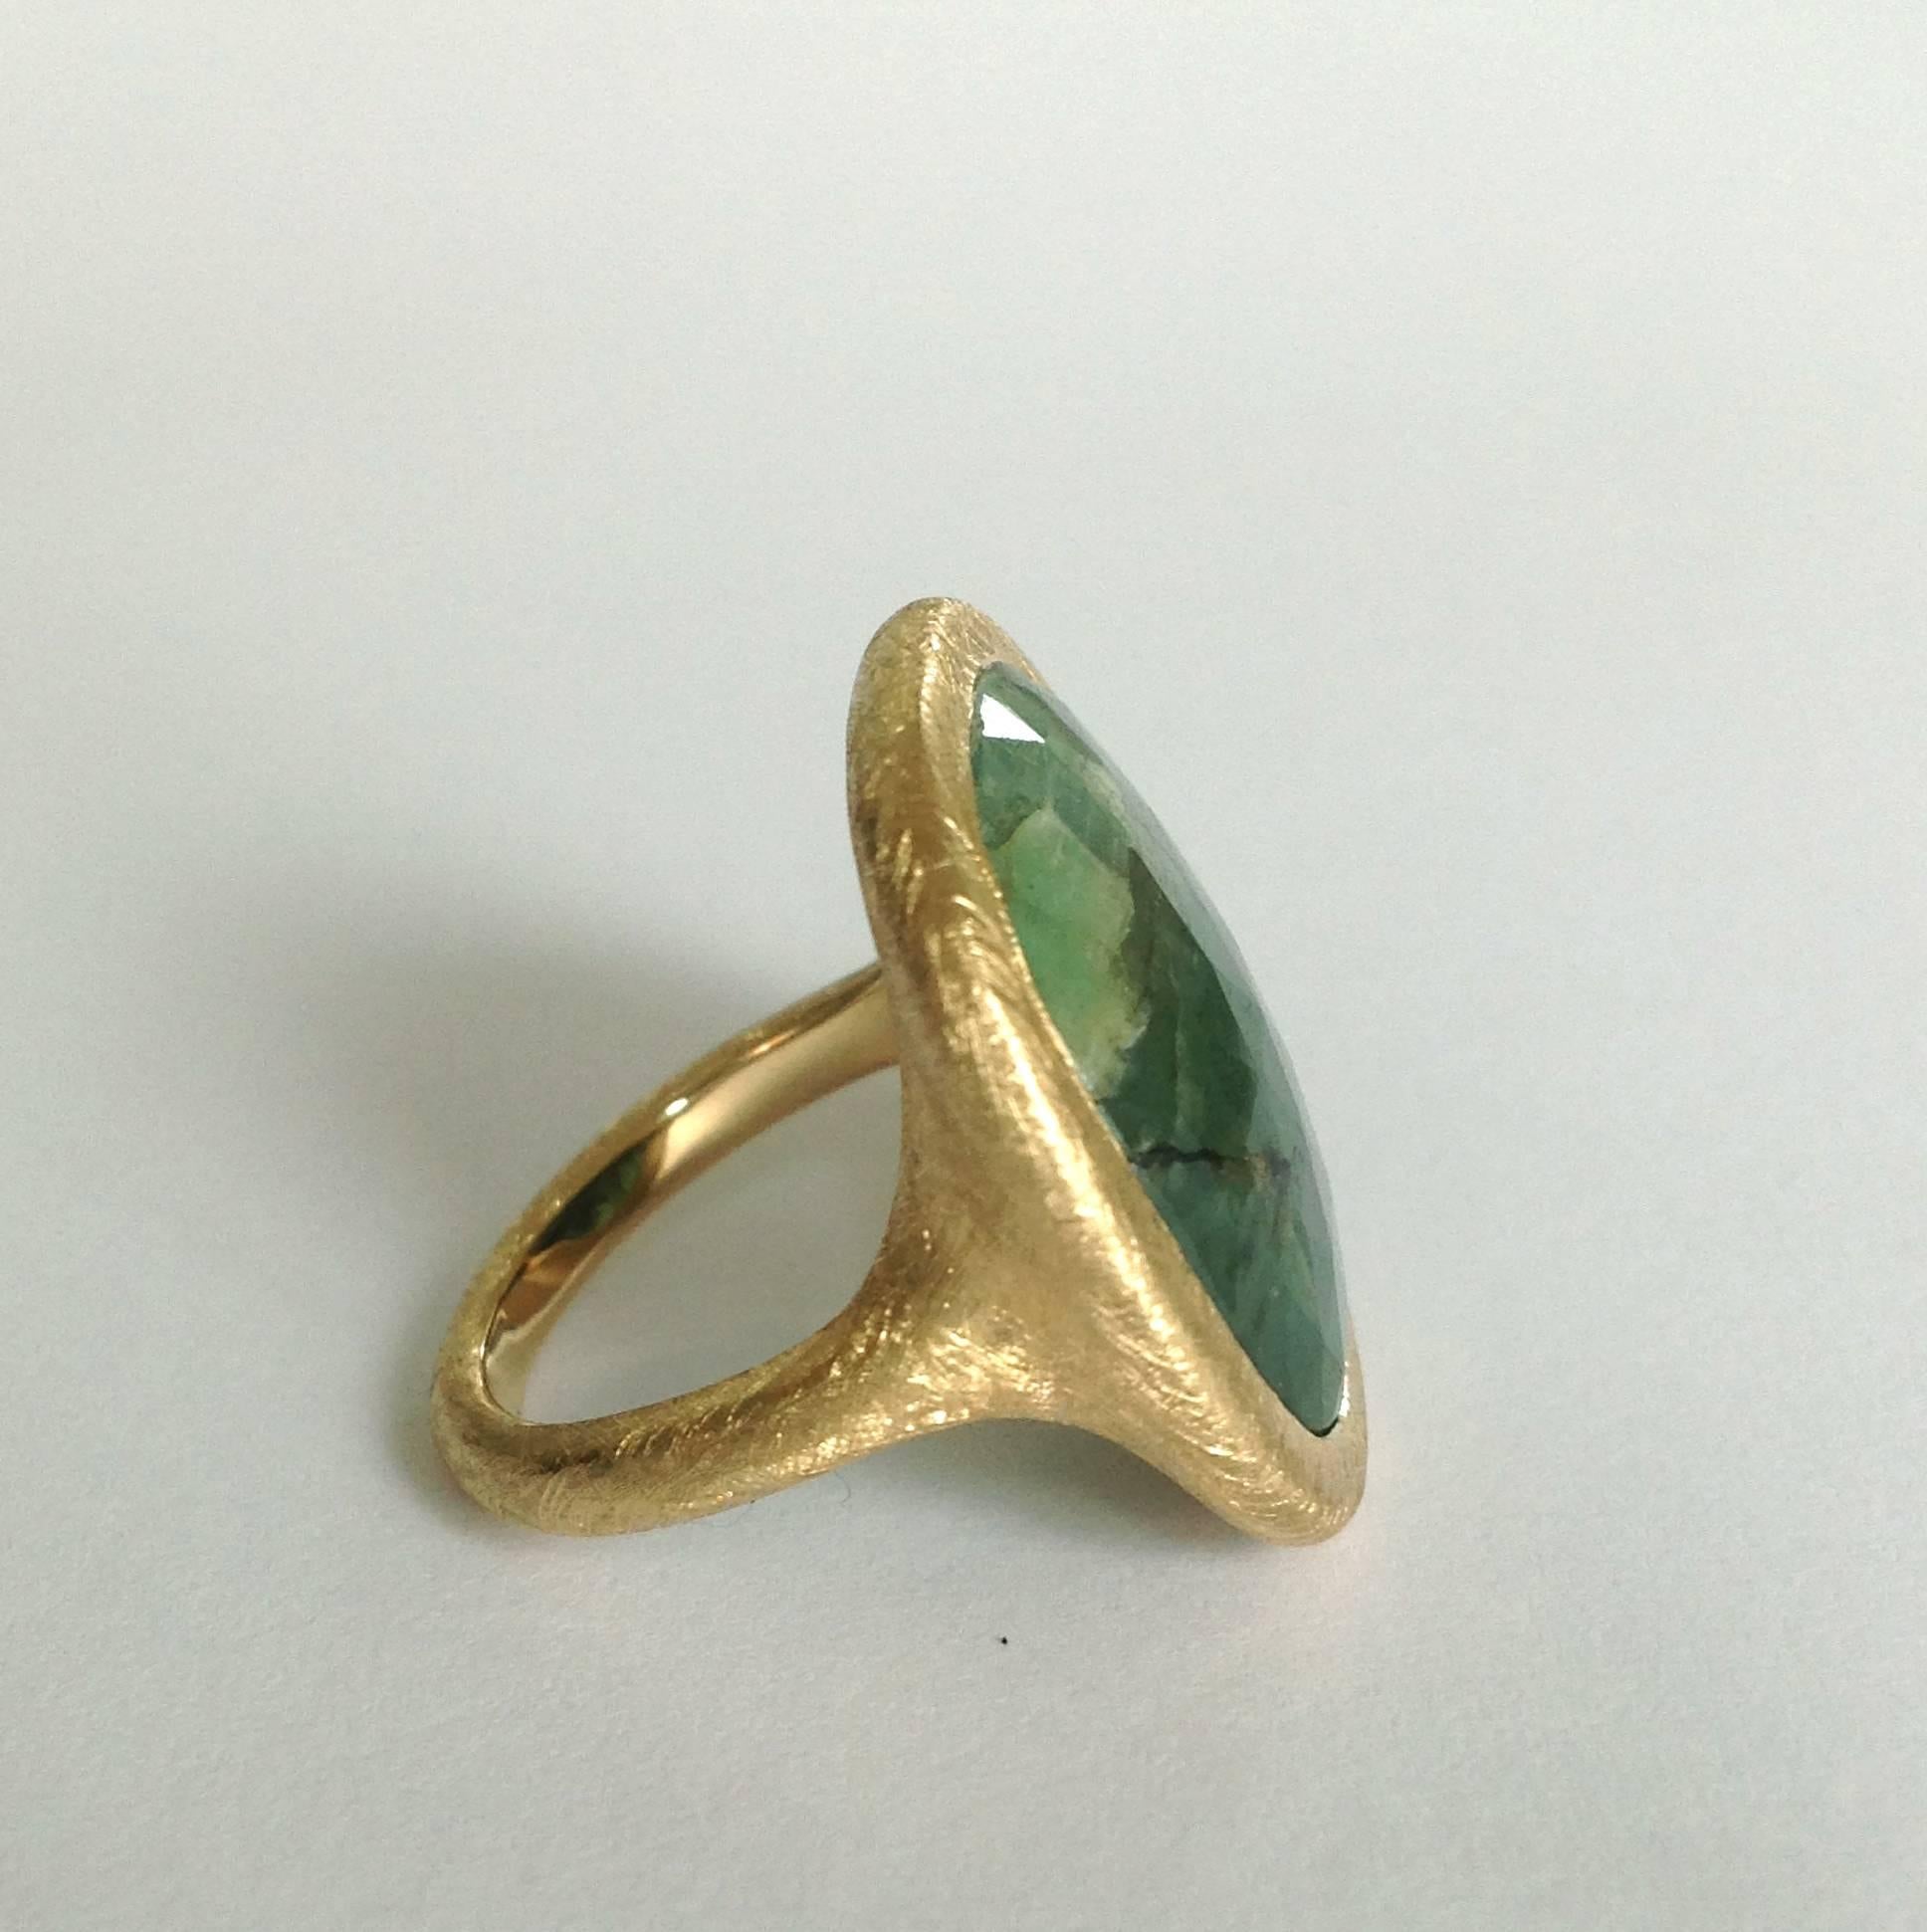 Dalben design One of a Kind 18k yellow gold scratch handmade finishing ring with a 11.14 carat bezel-set faceted raw Emerald slice.  Ring size 7 1/2 - EU 56 re-sizable to most finger sizes.  The ring is completely hand made in our atelier in Italy